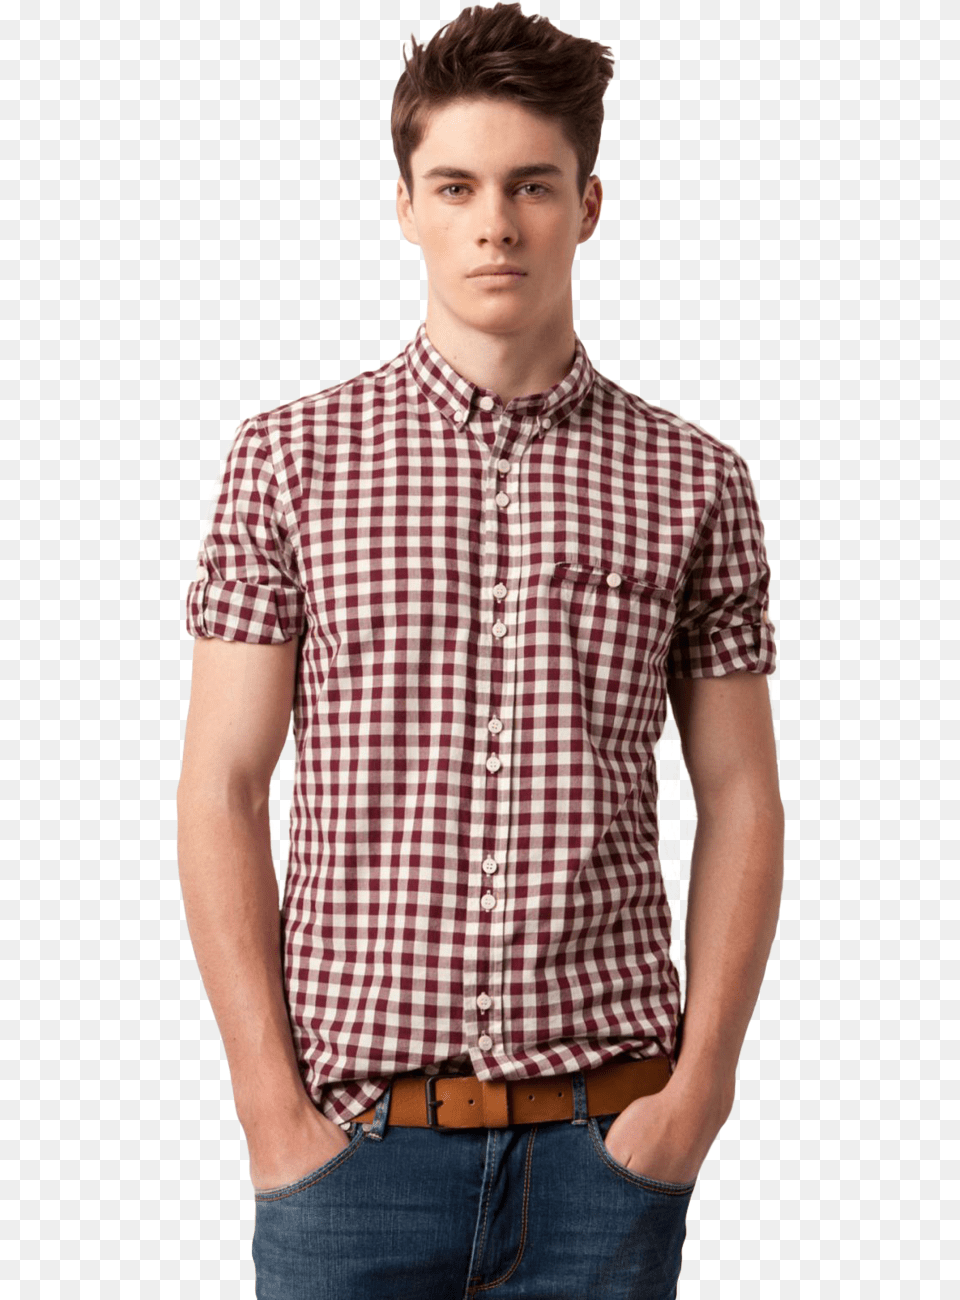 Man Image All American Guy Leather Belt, Shirt, Clothing, Blouse, Dress Shirt Free Png